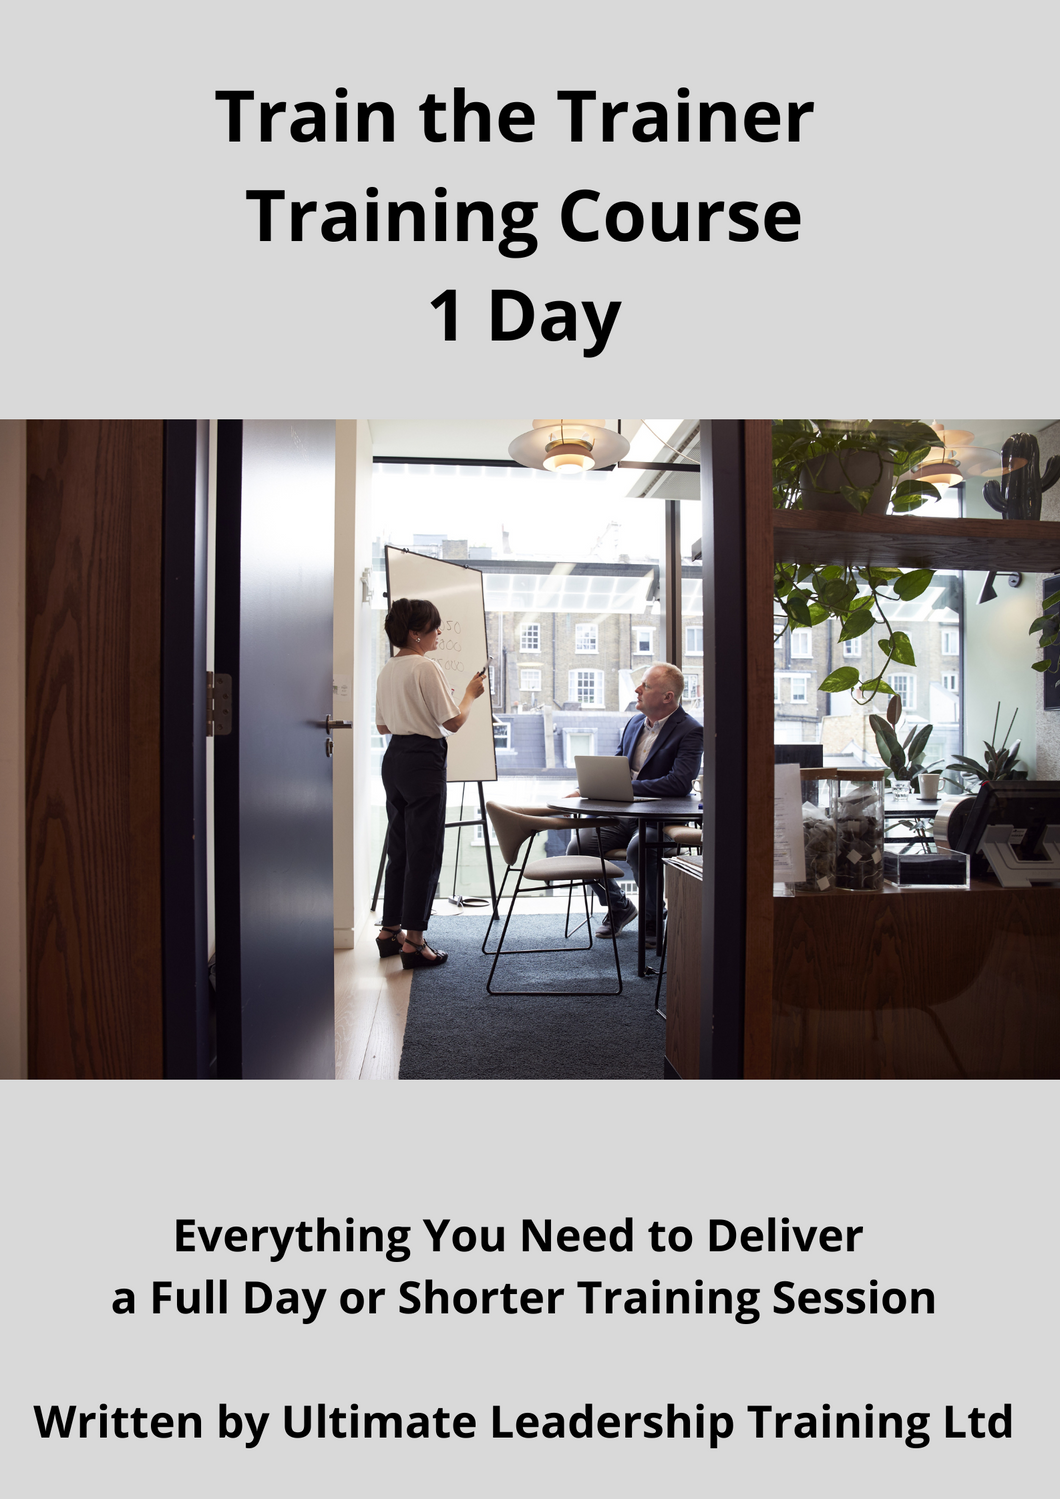 1 Day Train the Trainer